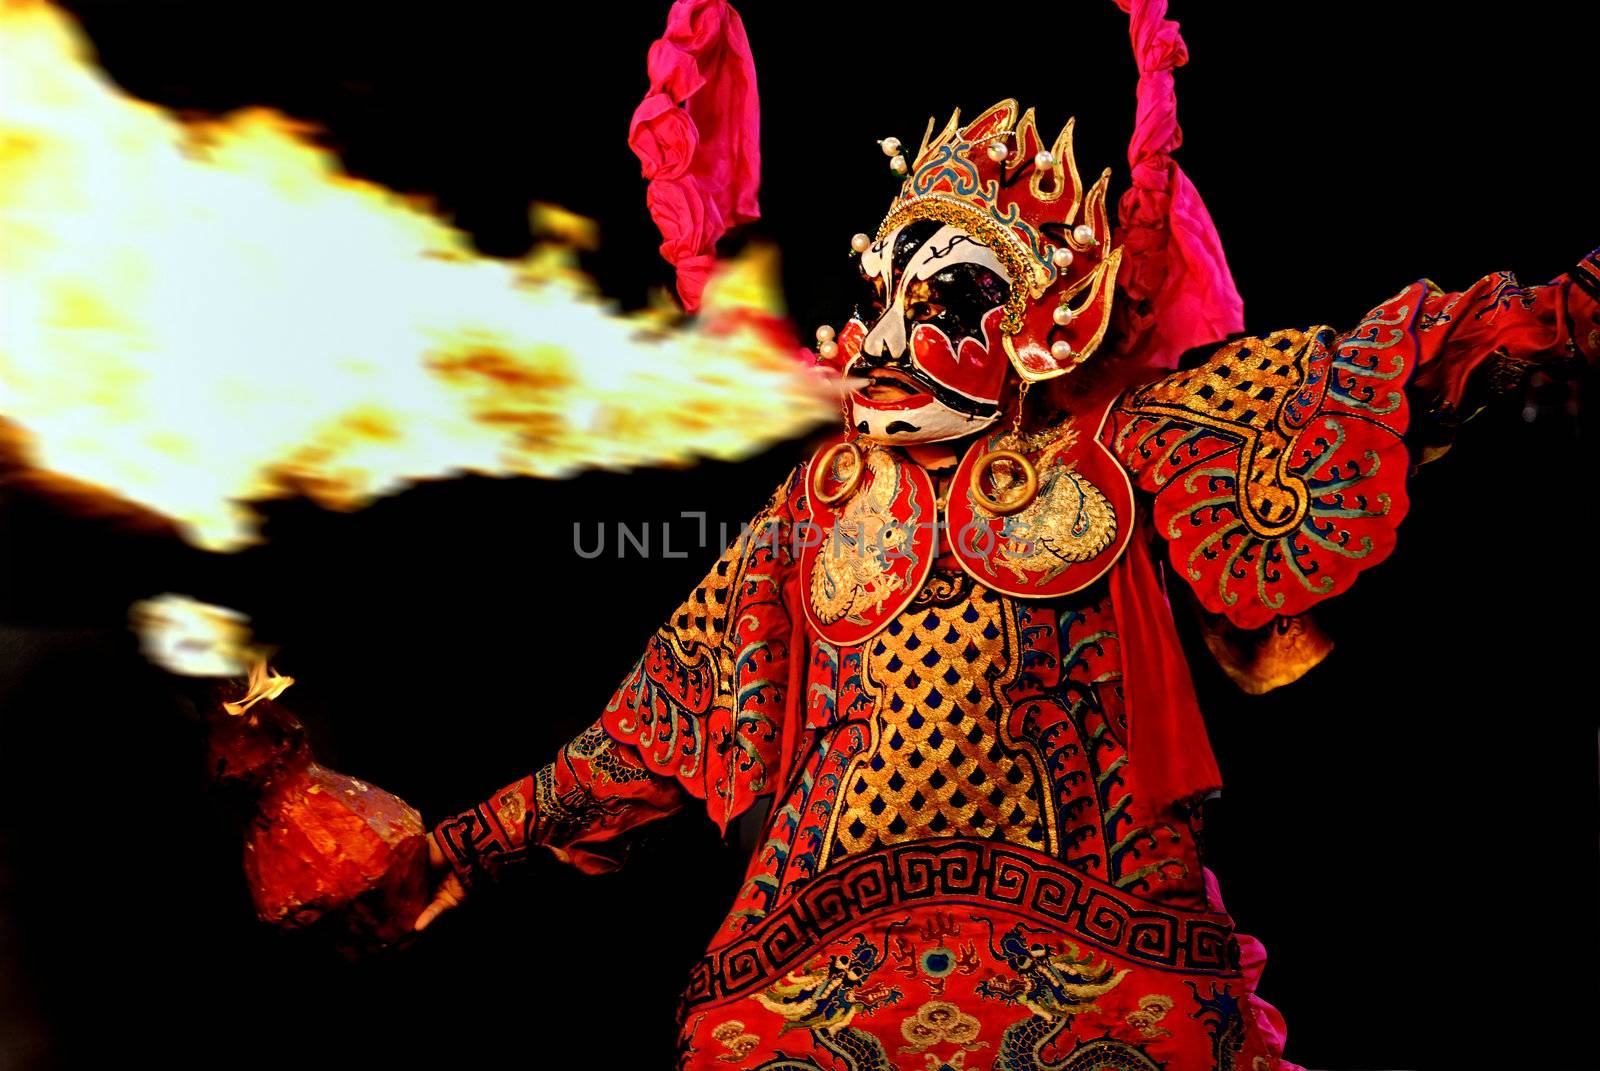 chinese traditional opera actor with theatrical costume by jackq